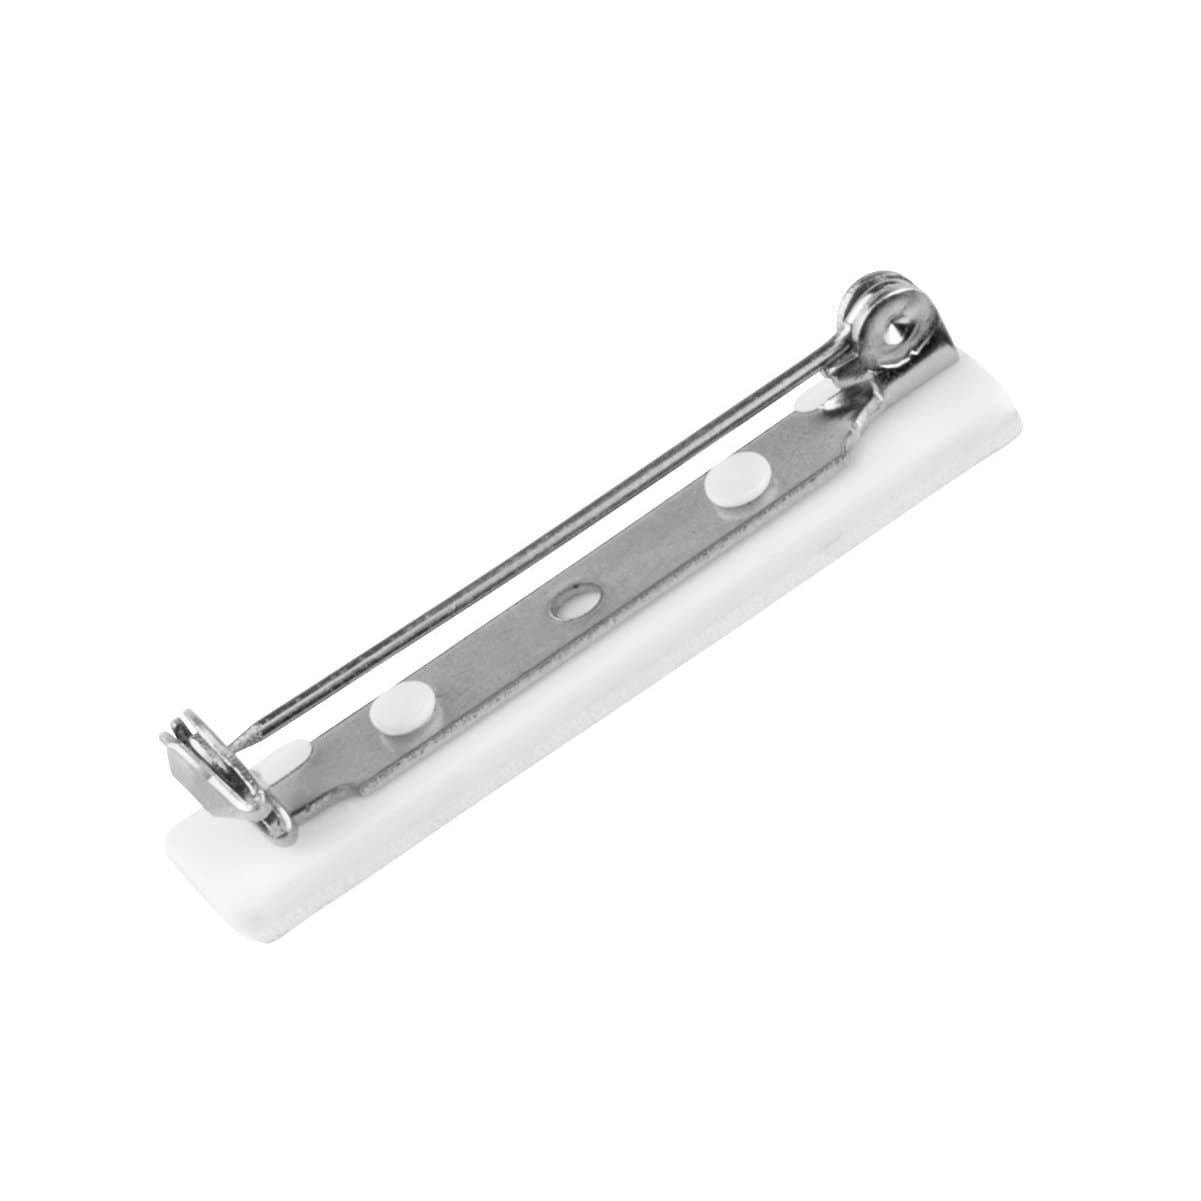 A Pressure-Sensitive 1 1/2 inch Nickel-Plated Steel Bar Pin with Adhesive Pin Back (P/N 5735-1100) with a white plastic backing, featuring an adhesive bar pin and a hinged pin mechanism for fastening.